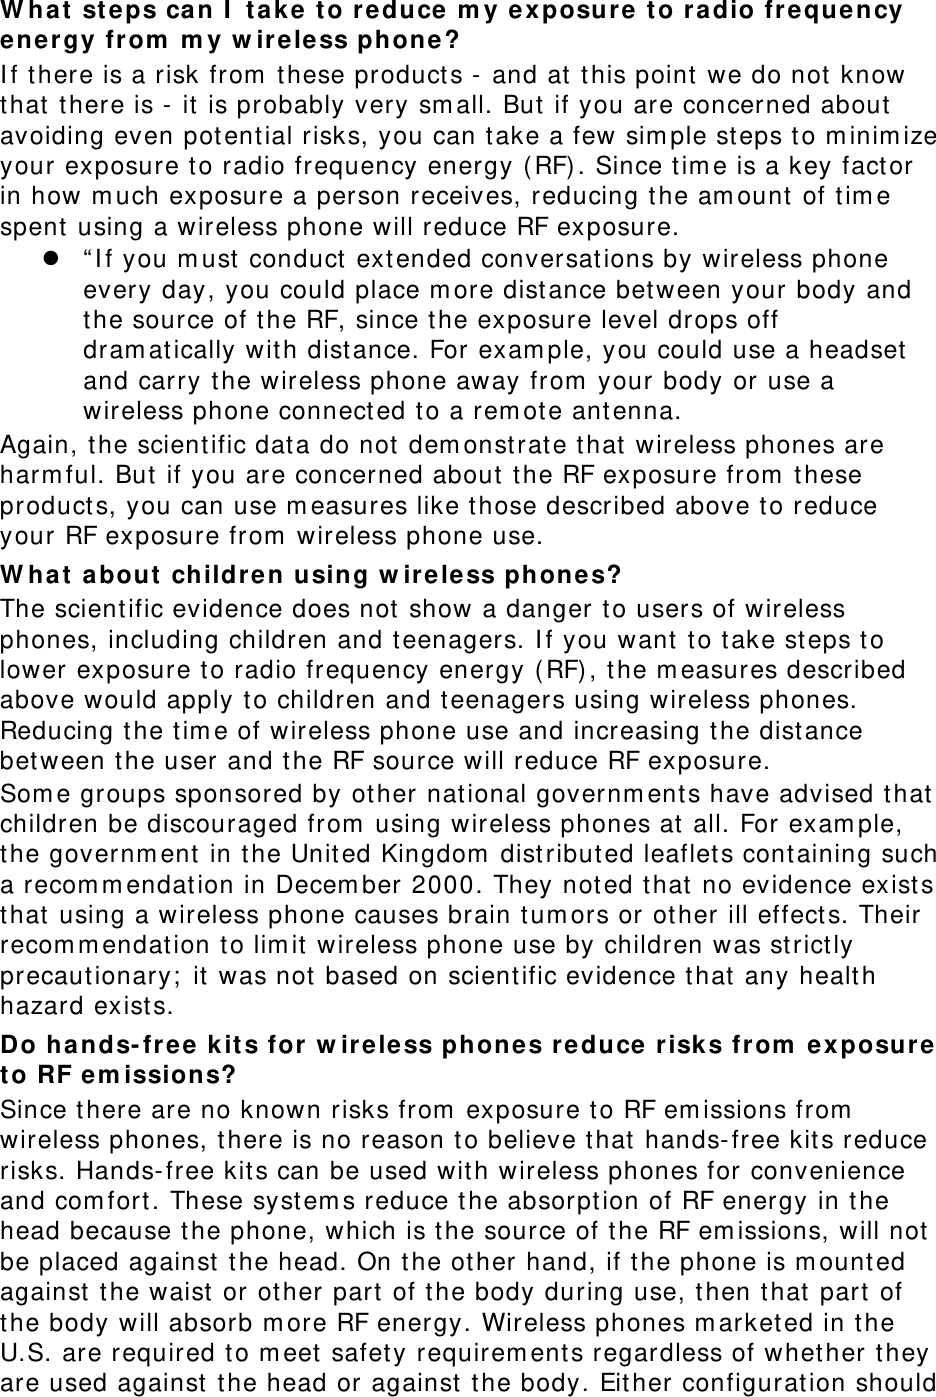 What steps can I take to reduce my exposure to radio frequency energy from my wireless phone? If there is a risk from these products - and at this point we do not know that there is - it is probably very small. But if you are concerned about avoiding even potential risks, you can take a few simple steps to minimize your exposure to radio frequency energy (RF). Since time is a key factor in how much exposure a person receives, reducing the amount of time spent using a wireless phone will reduce RF exposure.  “If you must conduct extended conversations by wireless phone every day, you could place more distance between your body and the source of the RF, since the exposure level drops off dramatically with distance. For example, you could use a headset and carry the wireless phone away from your body or use a wireless phone connected to a remote antenna. Again, the scientific data do not demonstrate that wireless phones are harmful. But if you are concerned about the RF exposure from these products, you can use measures like those described above to reduce your RF exposure from wireless phone use. What about children using wireless phones? The scientific evidence does not show a danger to users of wireless phones, including children and teenagers. If you want to take steps to lower exposure to radio frequency energy (RF), the measures described above would apply to children and teenagers using wireless phones. Reducing the time of wireless phone use and increasing the distance between the user and the RF source will reduce RF exposure. Some groups sponsored by other national governments have advised that children be discouraged from using wireless phones at all. For example, the government in the United Kingdom distributed leaflets containing such a recommendation in December 2000. They noted that no evidence exists that using a wireless phone causes brain tumors or other ill effects. Their recommendation to limit wireless phone use by children was strictly precautionary; it was not based on scientific evidence that any health hazard exists.  Do hands-free kits for wireless phones reduce risks from exposure to RF emissions? Since there are no known risks from exposure to RF emissions from wireless phones, there is no reason to believe that hands-free kits reduce risks. Hands-free kits can be used with wireless phones for convenience and comfort. These systems reduce the absorption of RF energy in the head because the phone, which is the source of the RF emissions, will not be placed against the head. On the other hand, if the phone is mounted against the waist or other part of the body during use, then that part of the body will absorb more RF energy. Wireless phones marketed in the U.S. are required to meet safety requirements regardless of whether they are used against the head or against the body. Either configuration should 